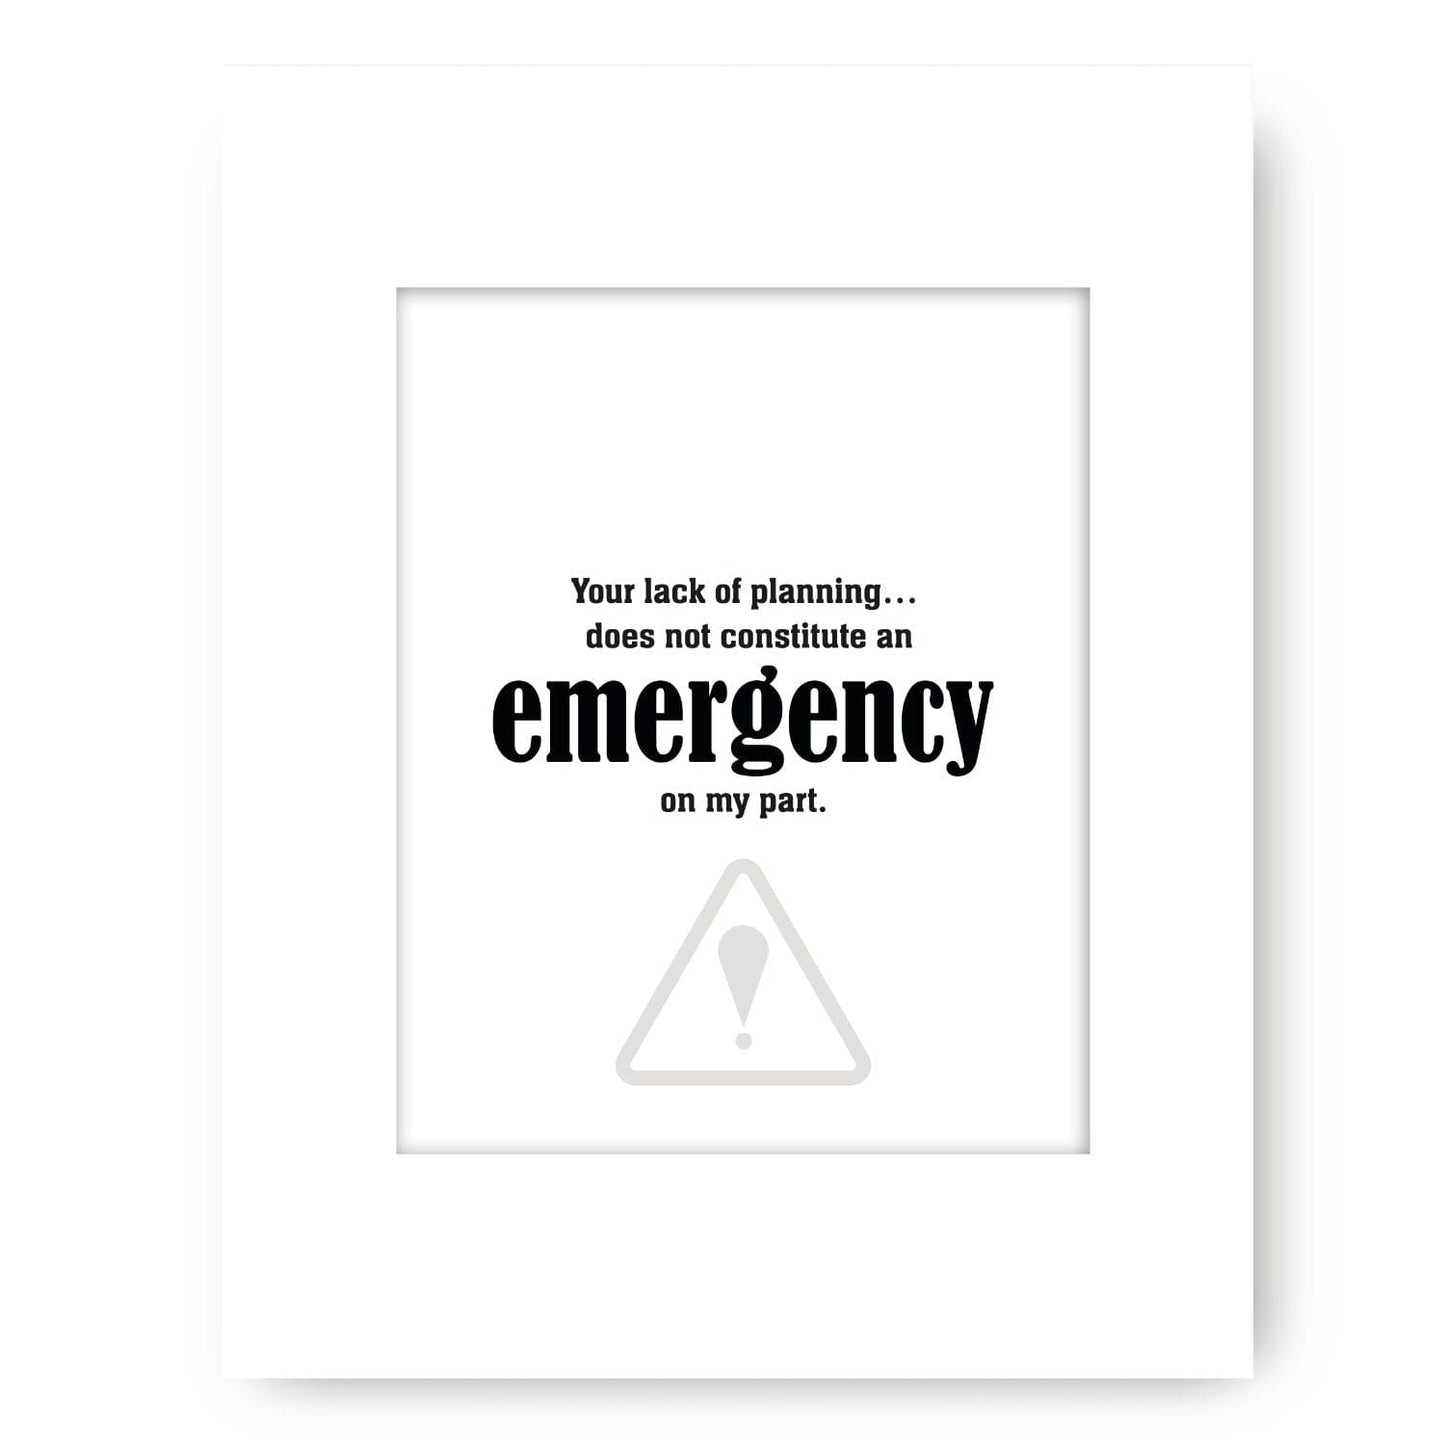 Your Lack of Planning Does Not Constitute an Emergency Wise and Wiseass Quotes Song Lyrics Art 8x10 White Matted Print 